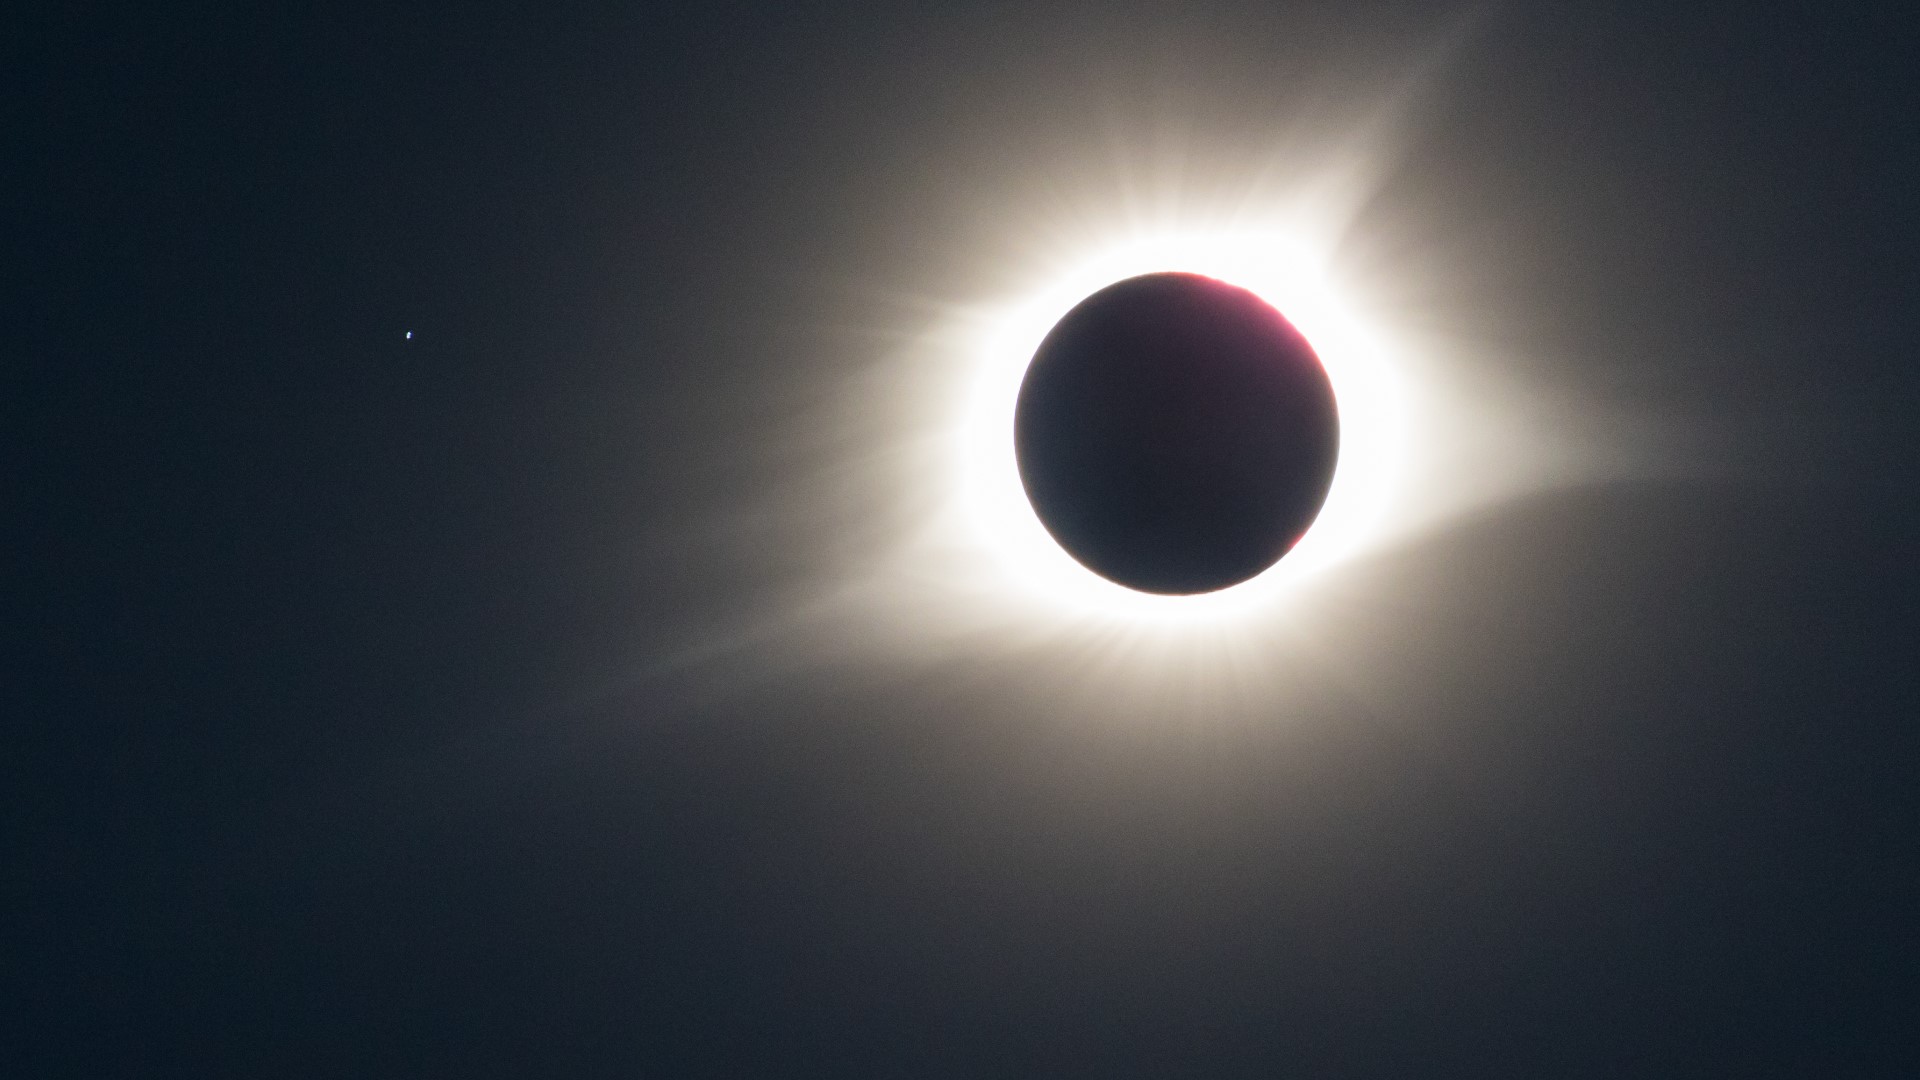 KING 5 Chief Meteorologist Mike Everett explains the anatomy of a solar eclipse.